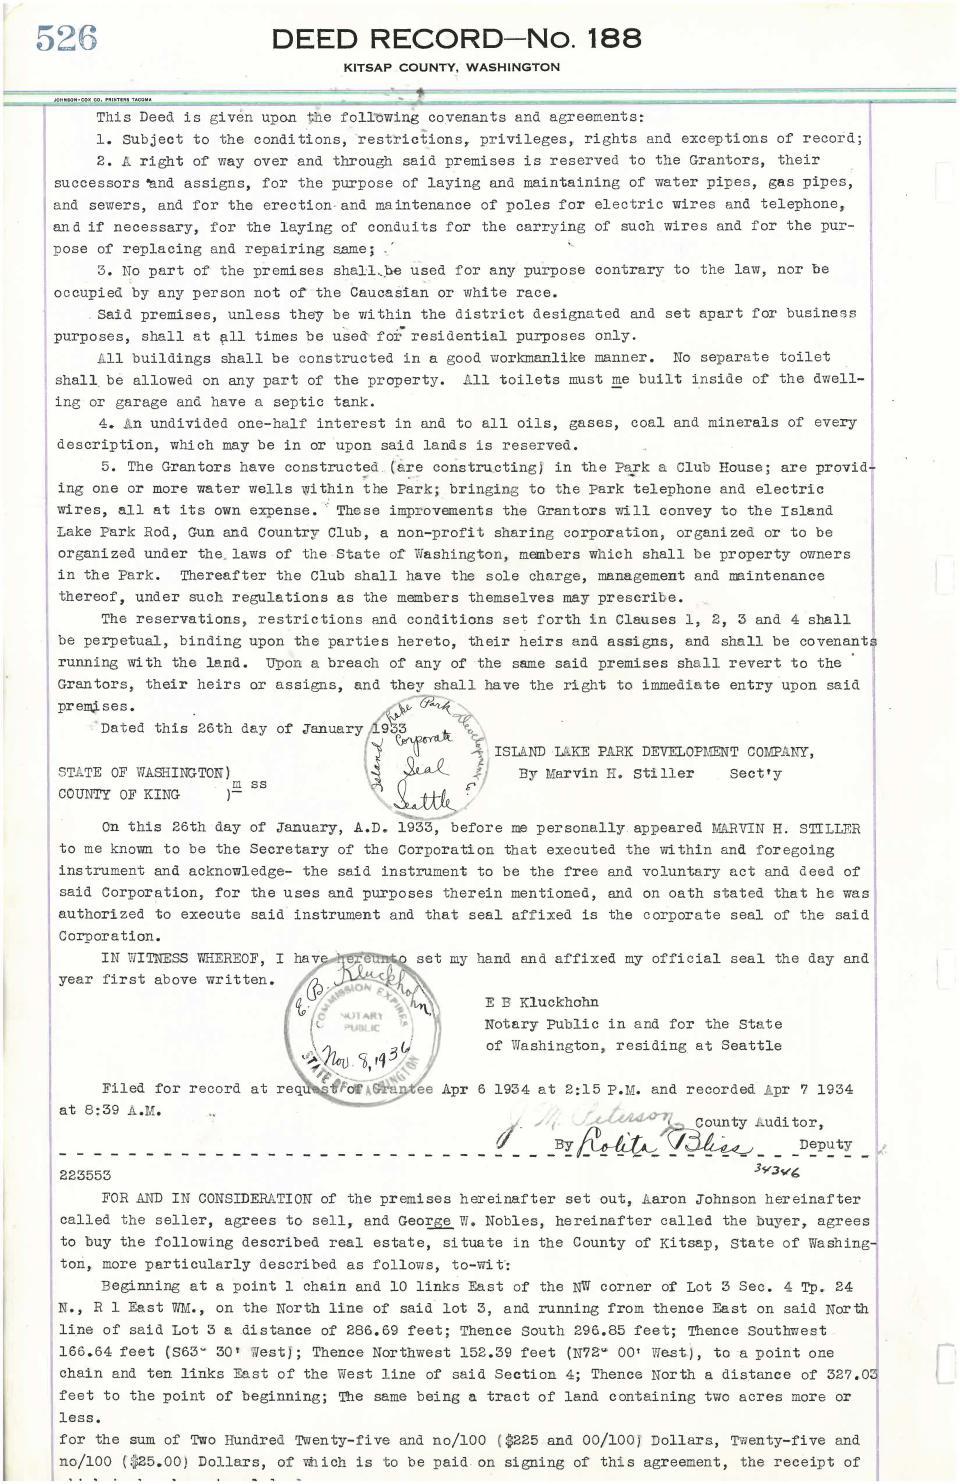 A deed of a property on the east side of Island Lake in the 1930s has language of racial restrictions that said "No part of the premises shall be used for any purpose contrary to the law, nor be occupied by any person not of the Caucasion or white race," in Page 2.